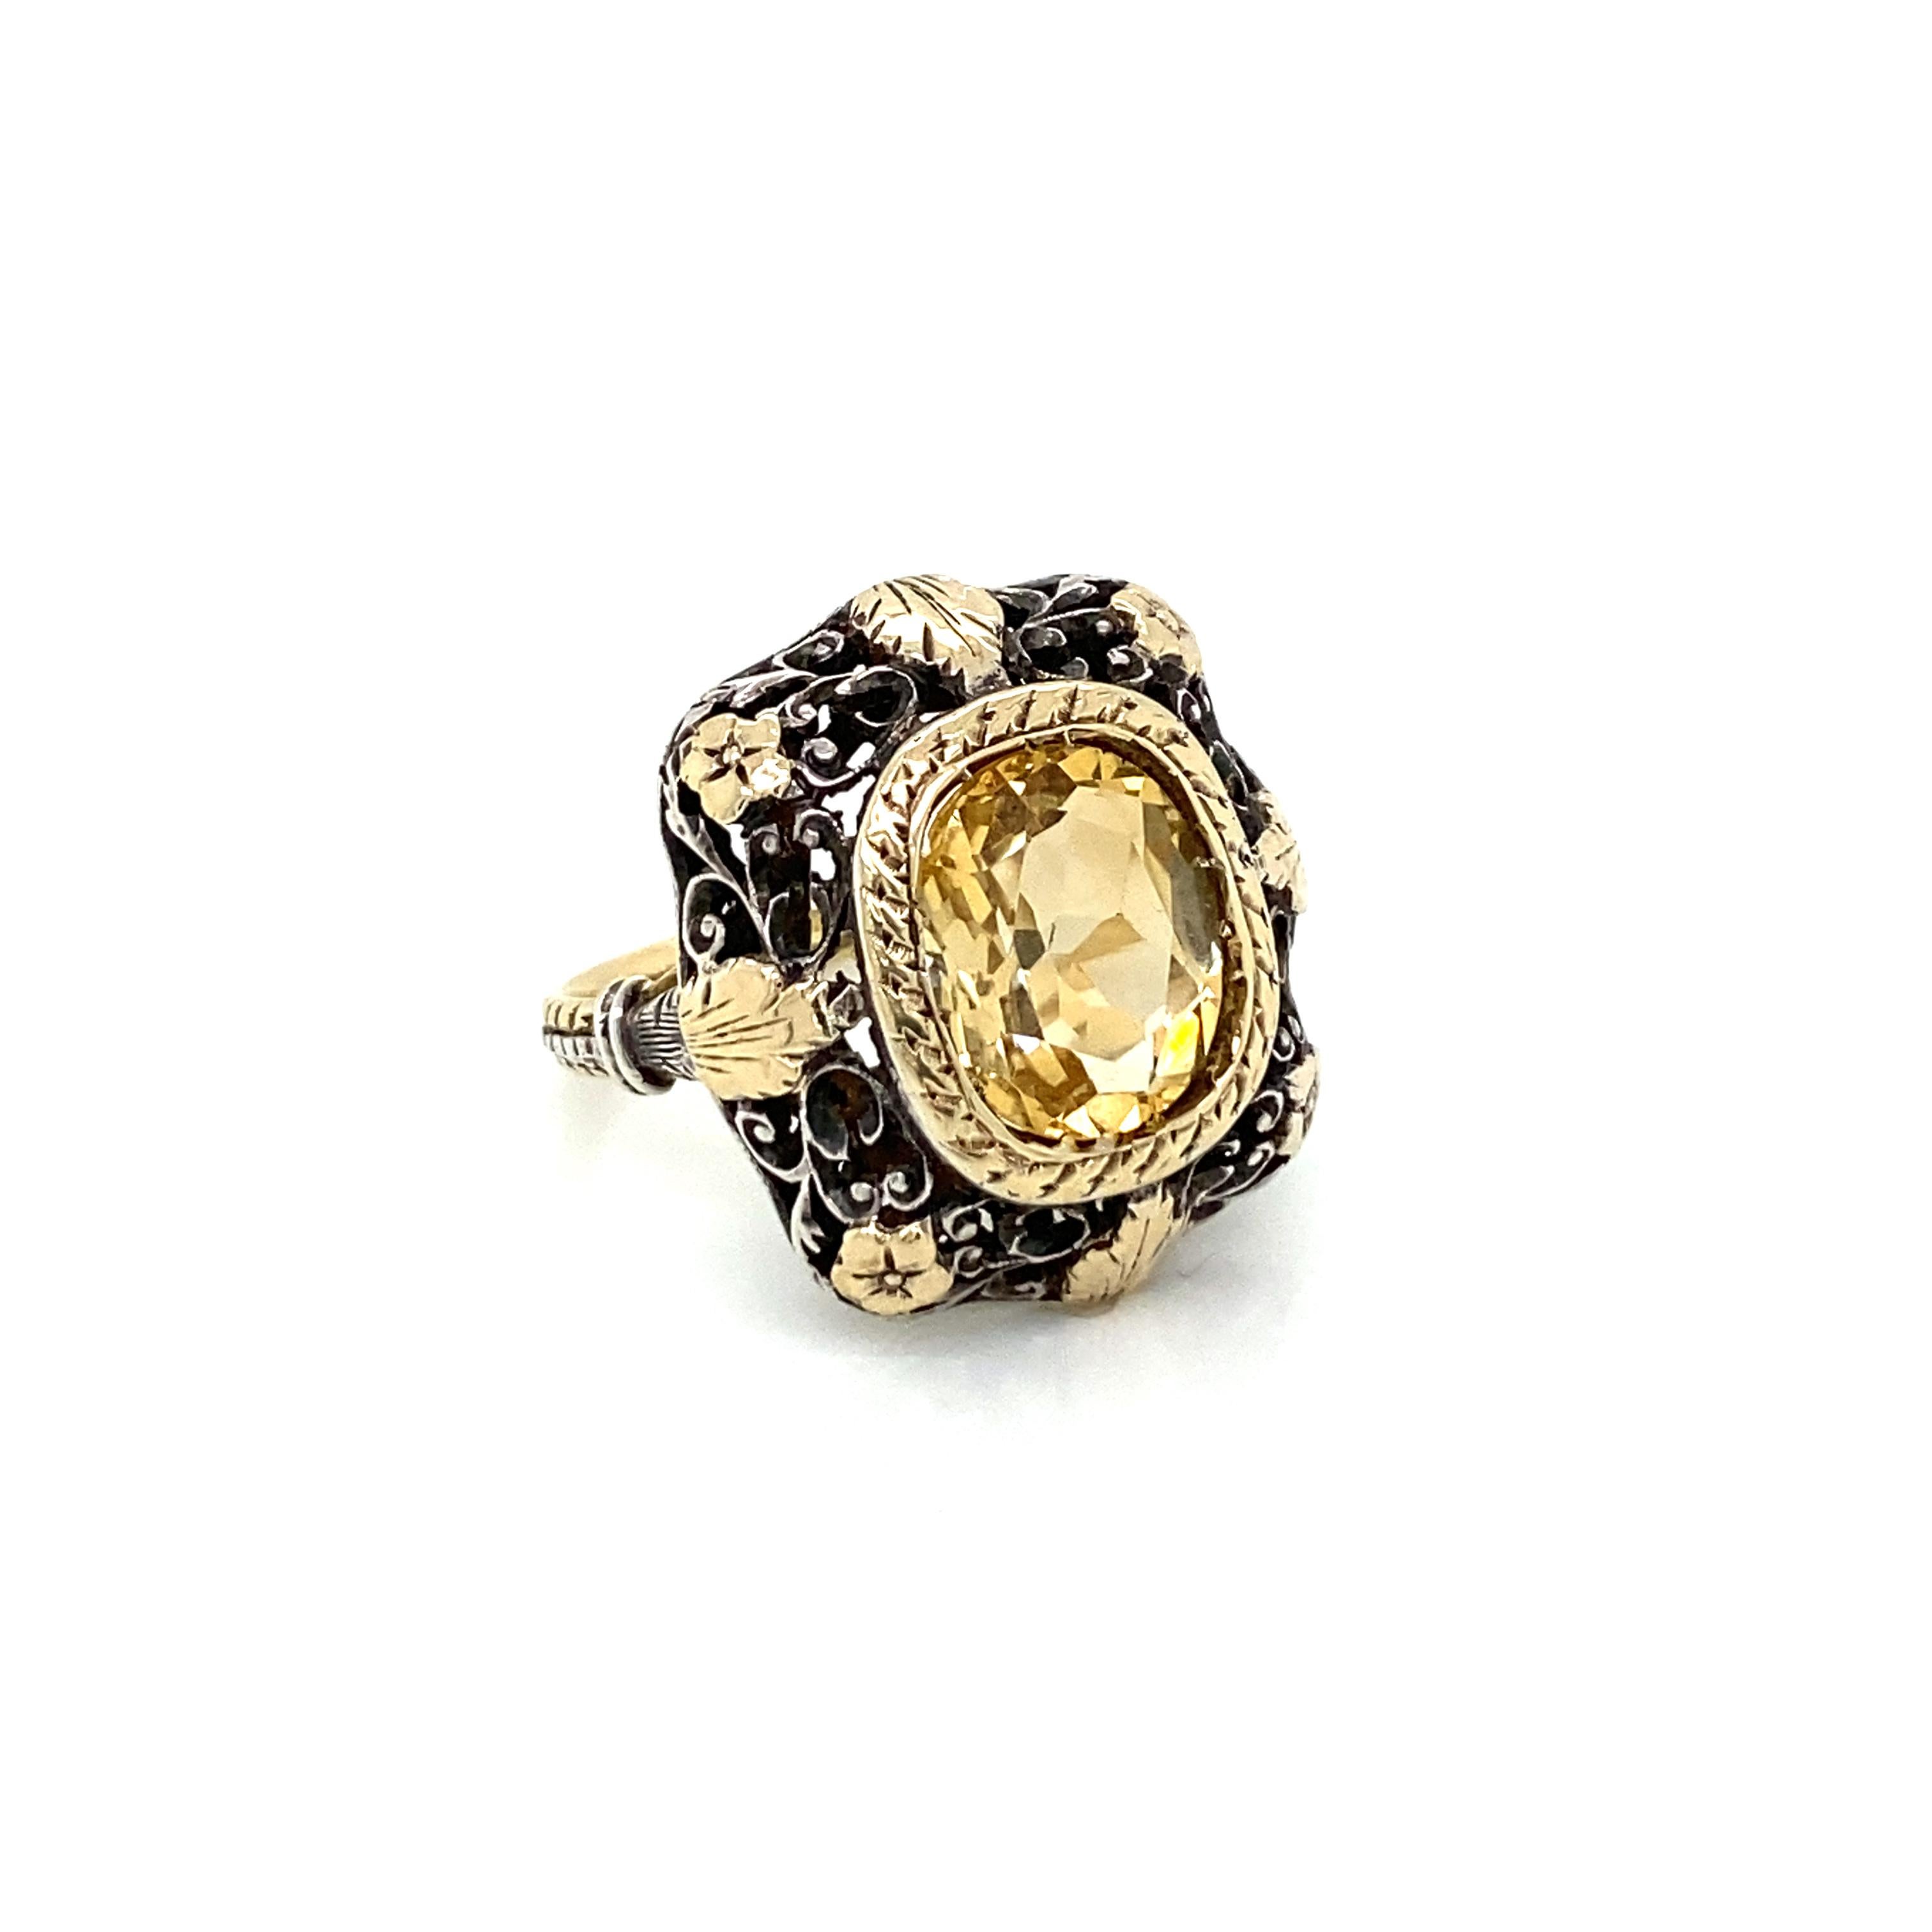 A classic Victorian piece from 1880s features in the middle a large and sparkling Natural Citrine Quartz.
The ring is set in a 12k gold and silver mounting, all hand engraved with the classic motifs of the Victorian time.

CONDITION: Pre Owned -